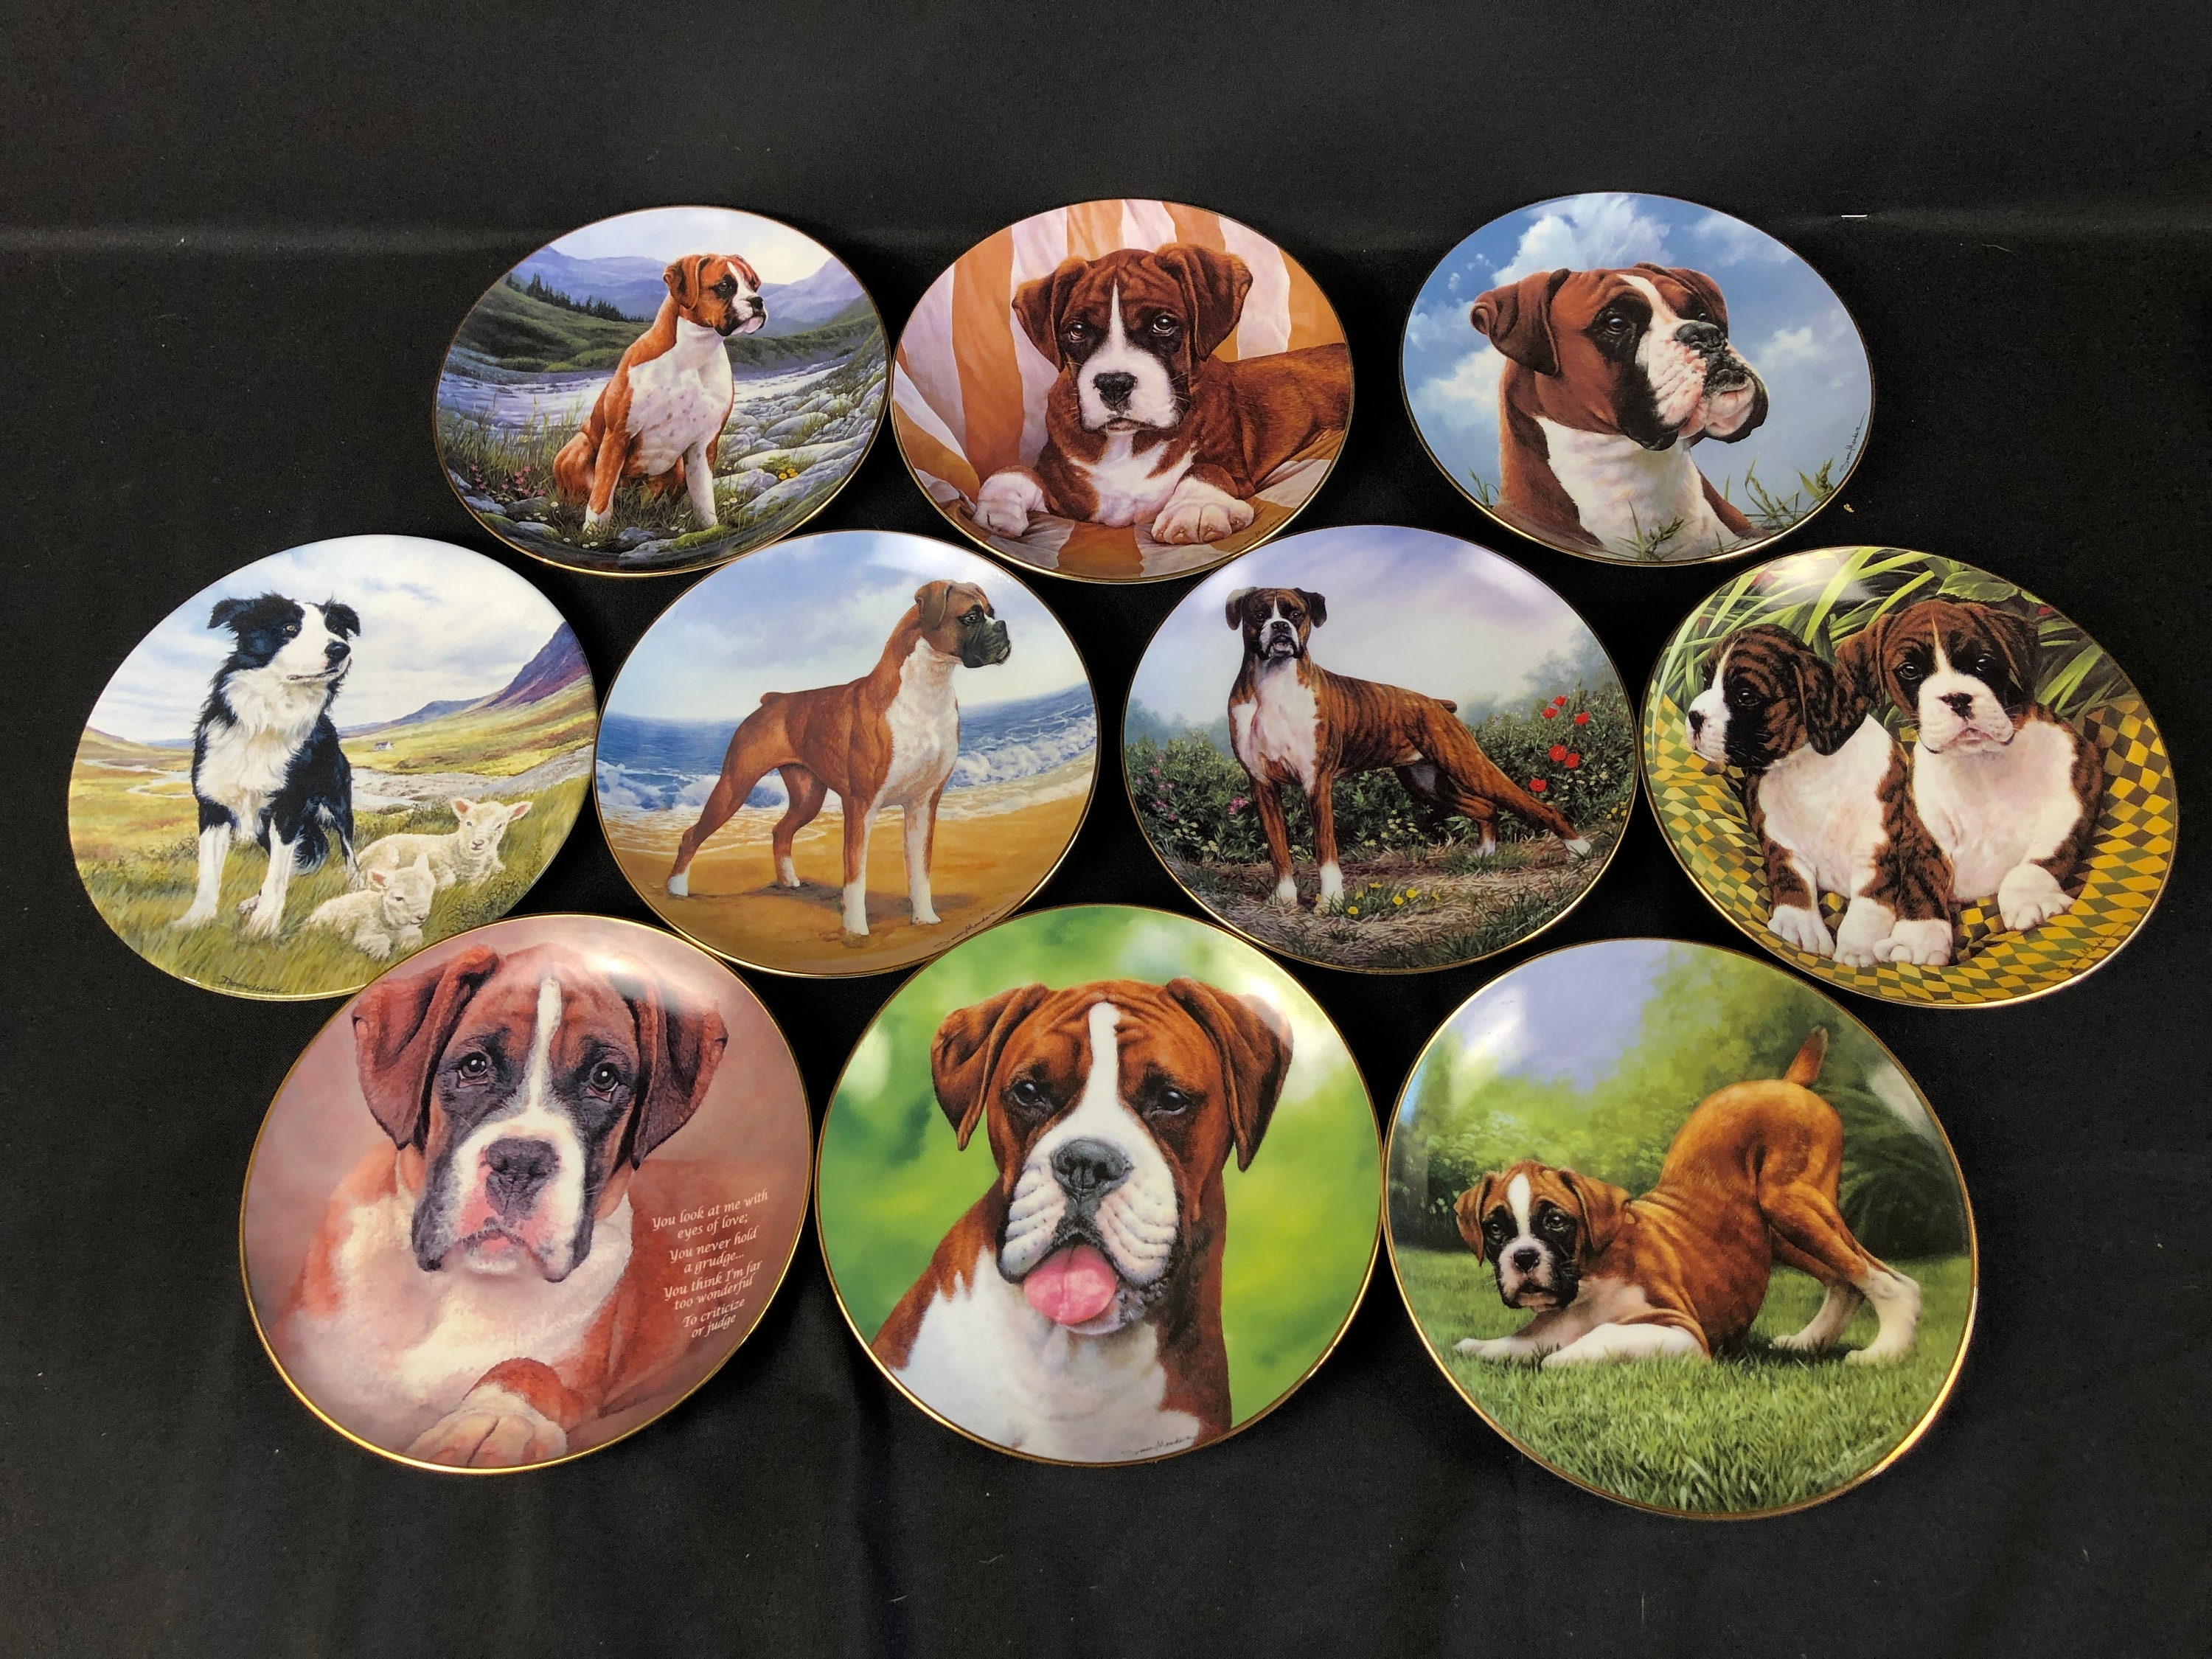 Danbury Mint Plate by Simon Mendez " The Look " The Boxer Dog 